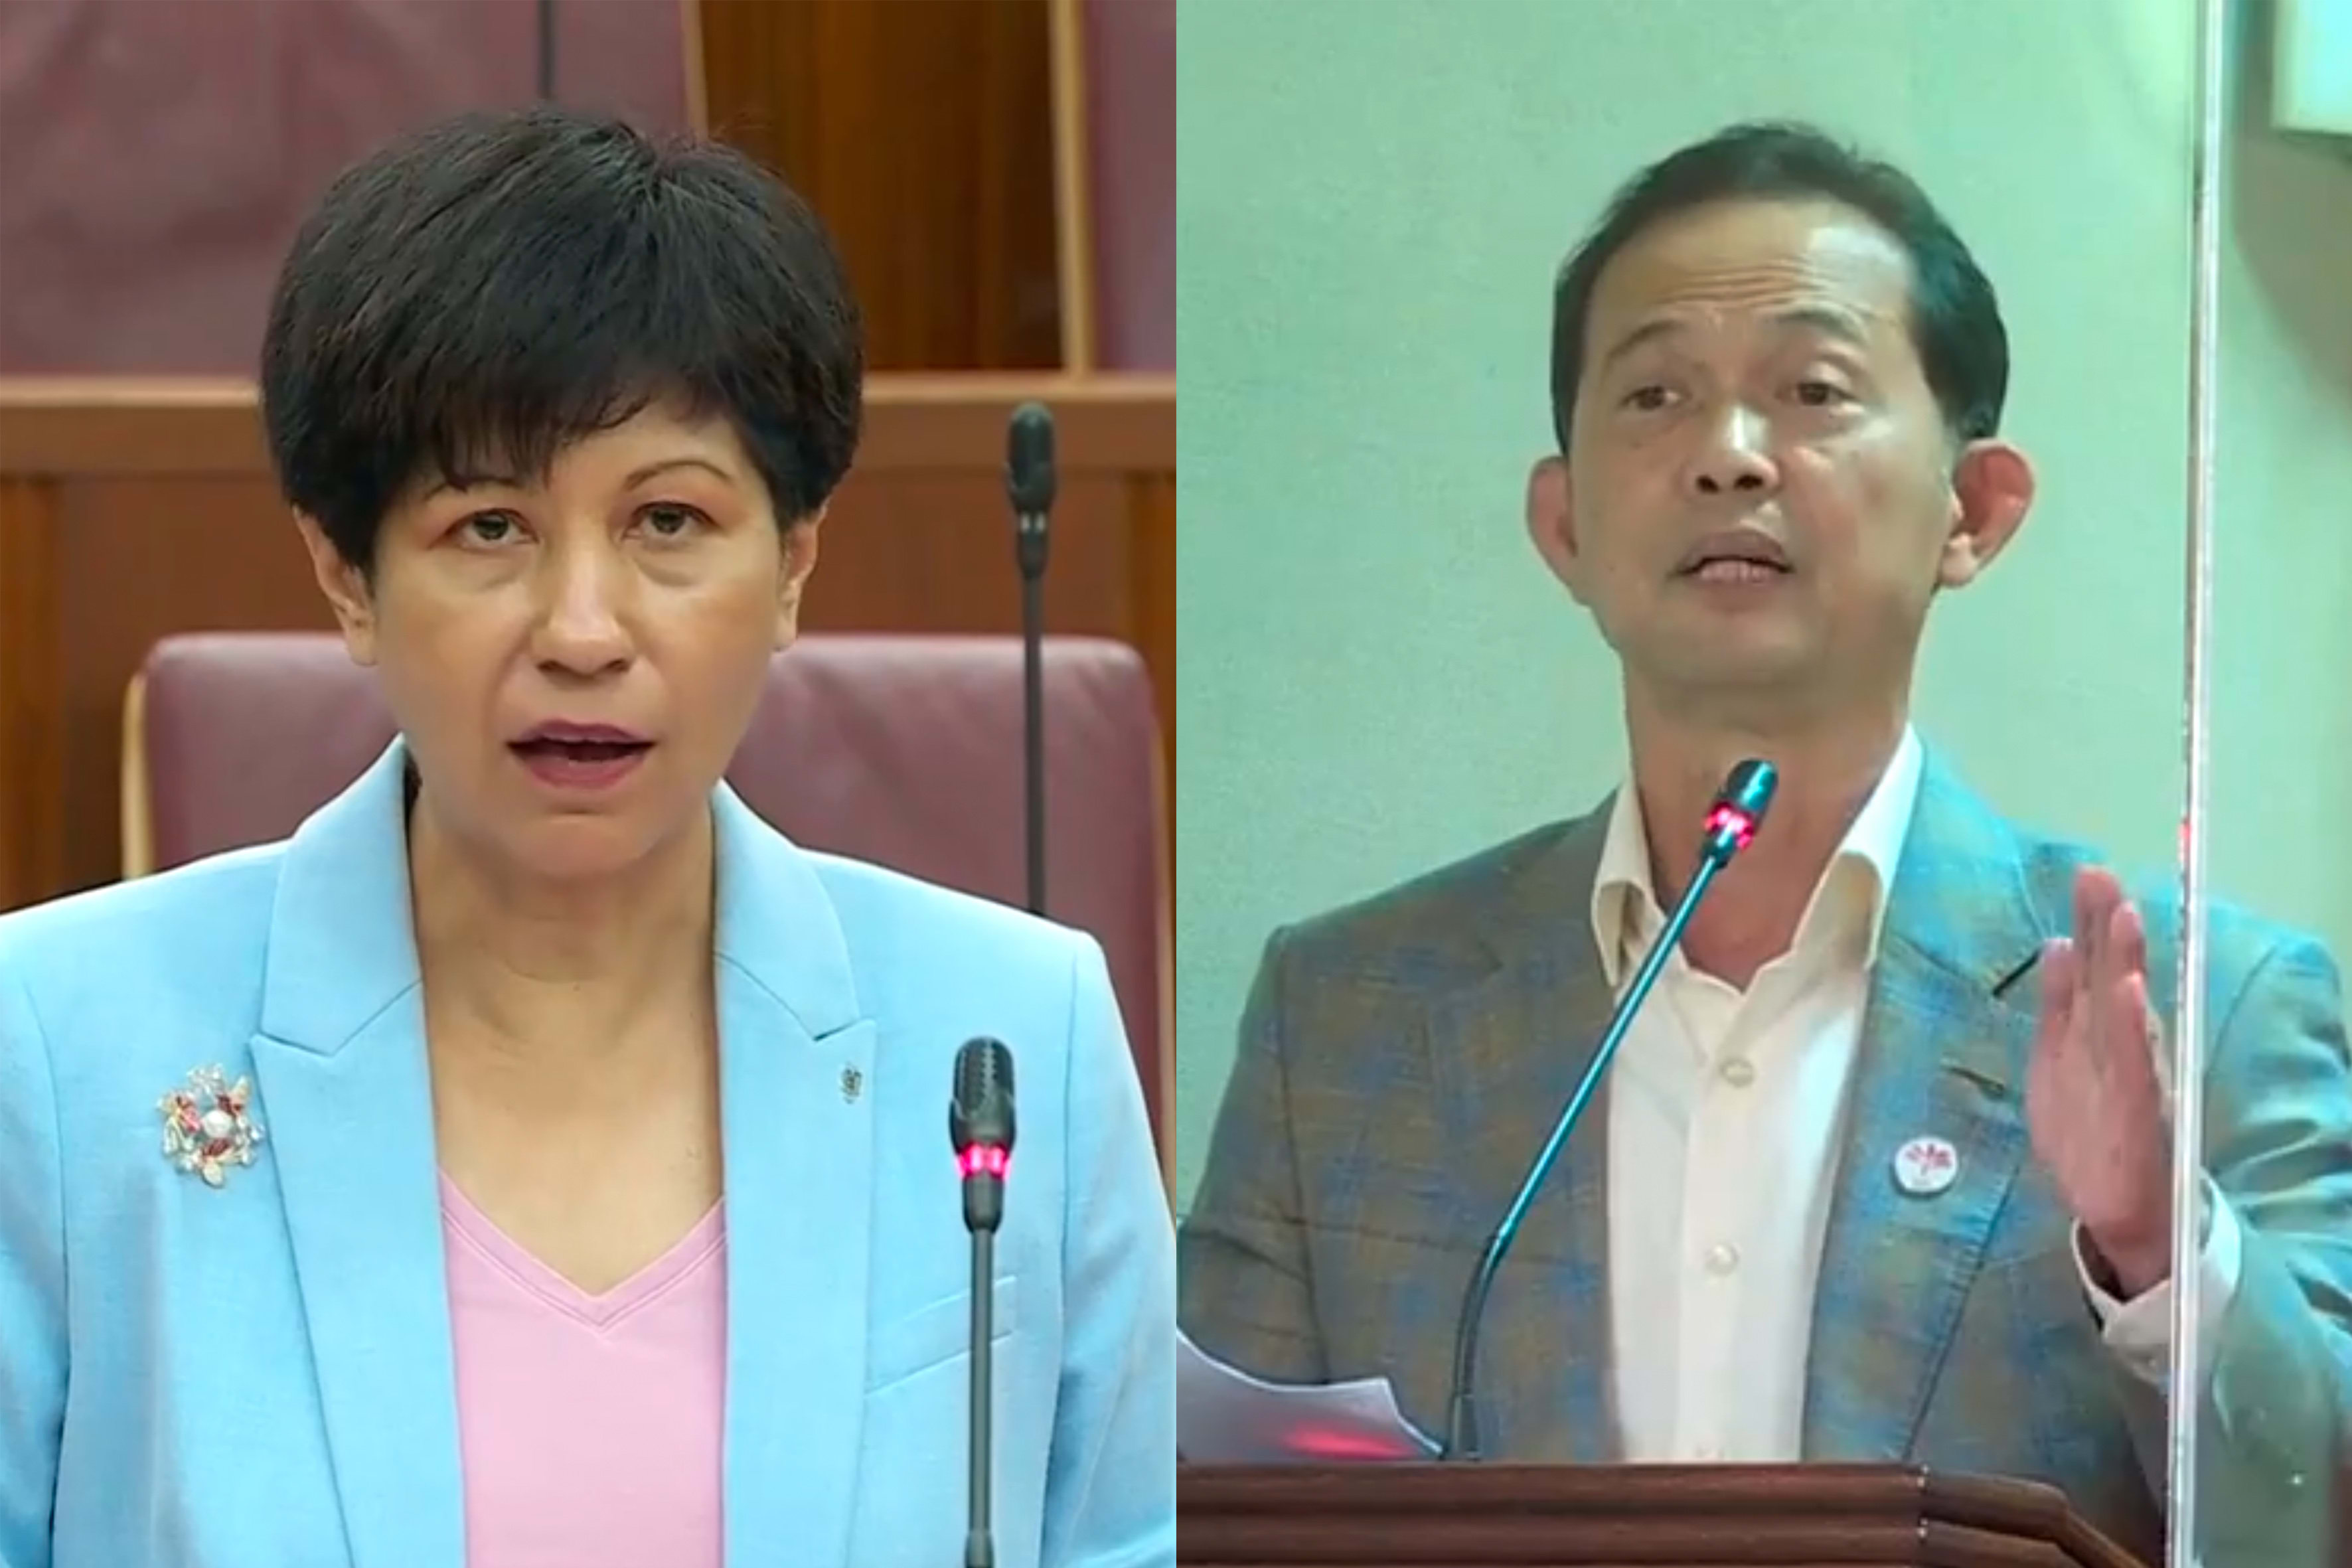 Leader of the House Indranee Rajah (left) and Mr Leong Mun Wai (right), Non-Constituency Member of Parliament.